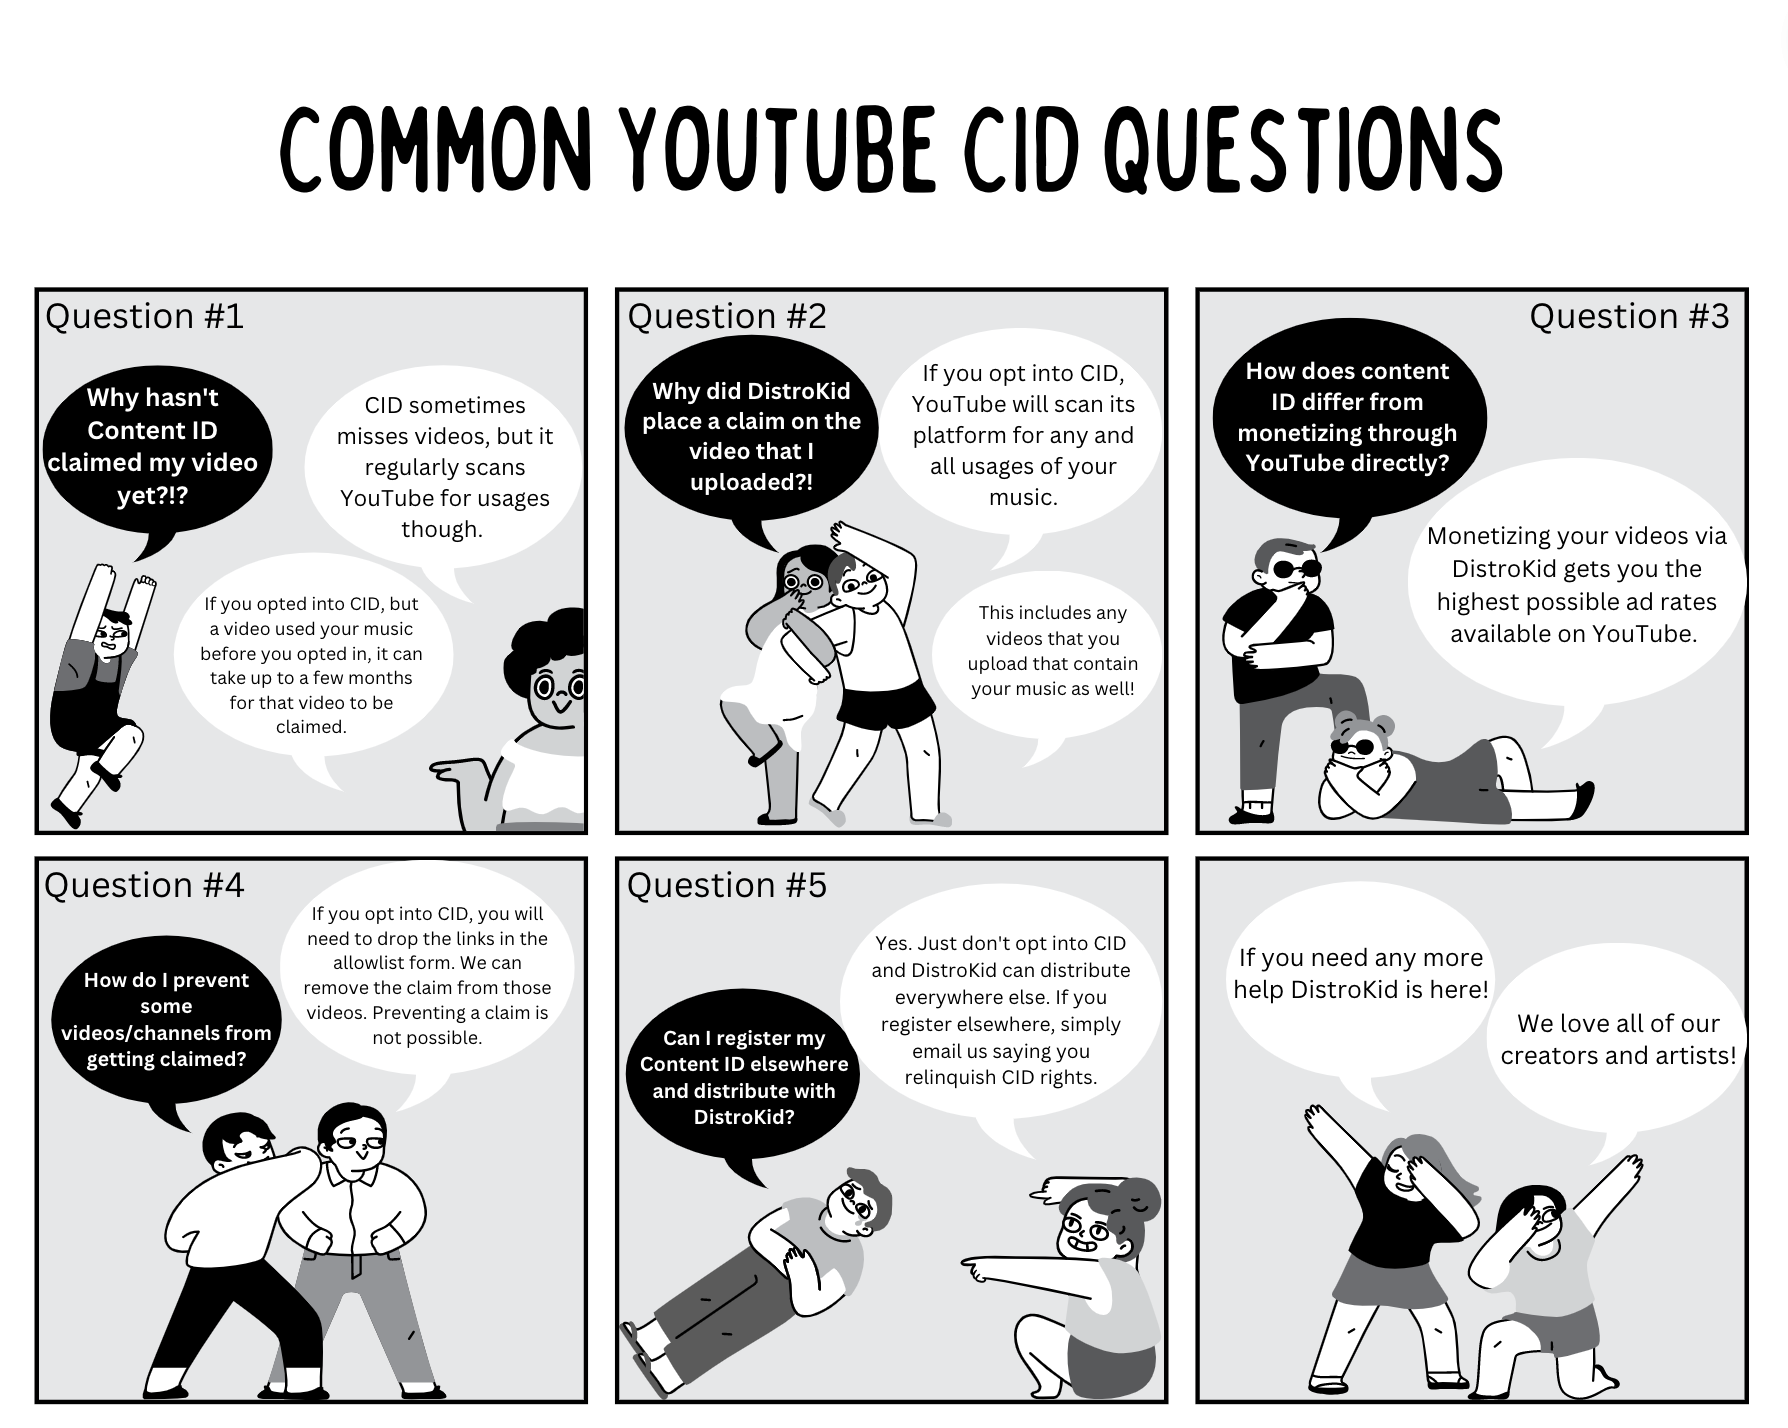 Question and answer segments in comic form regarding YouTube CID.